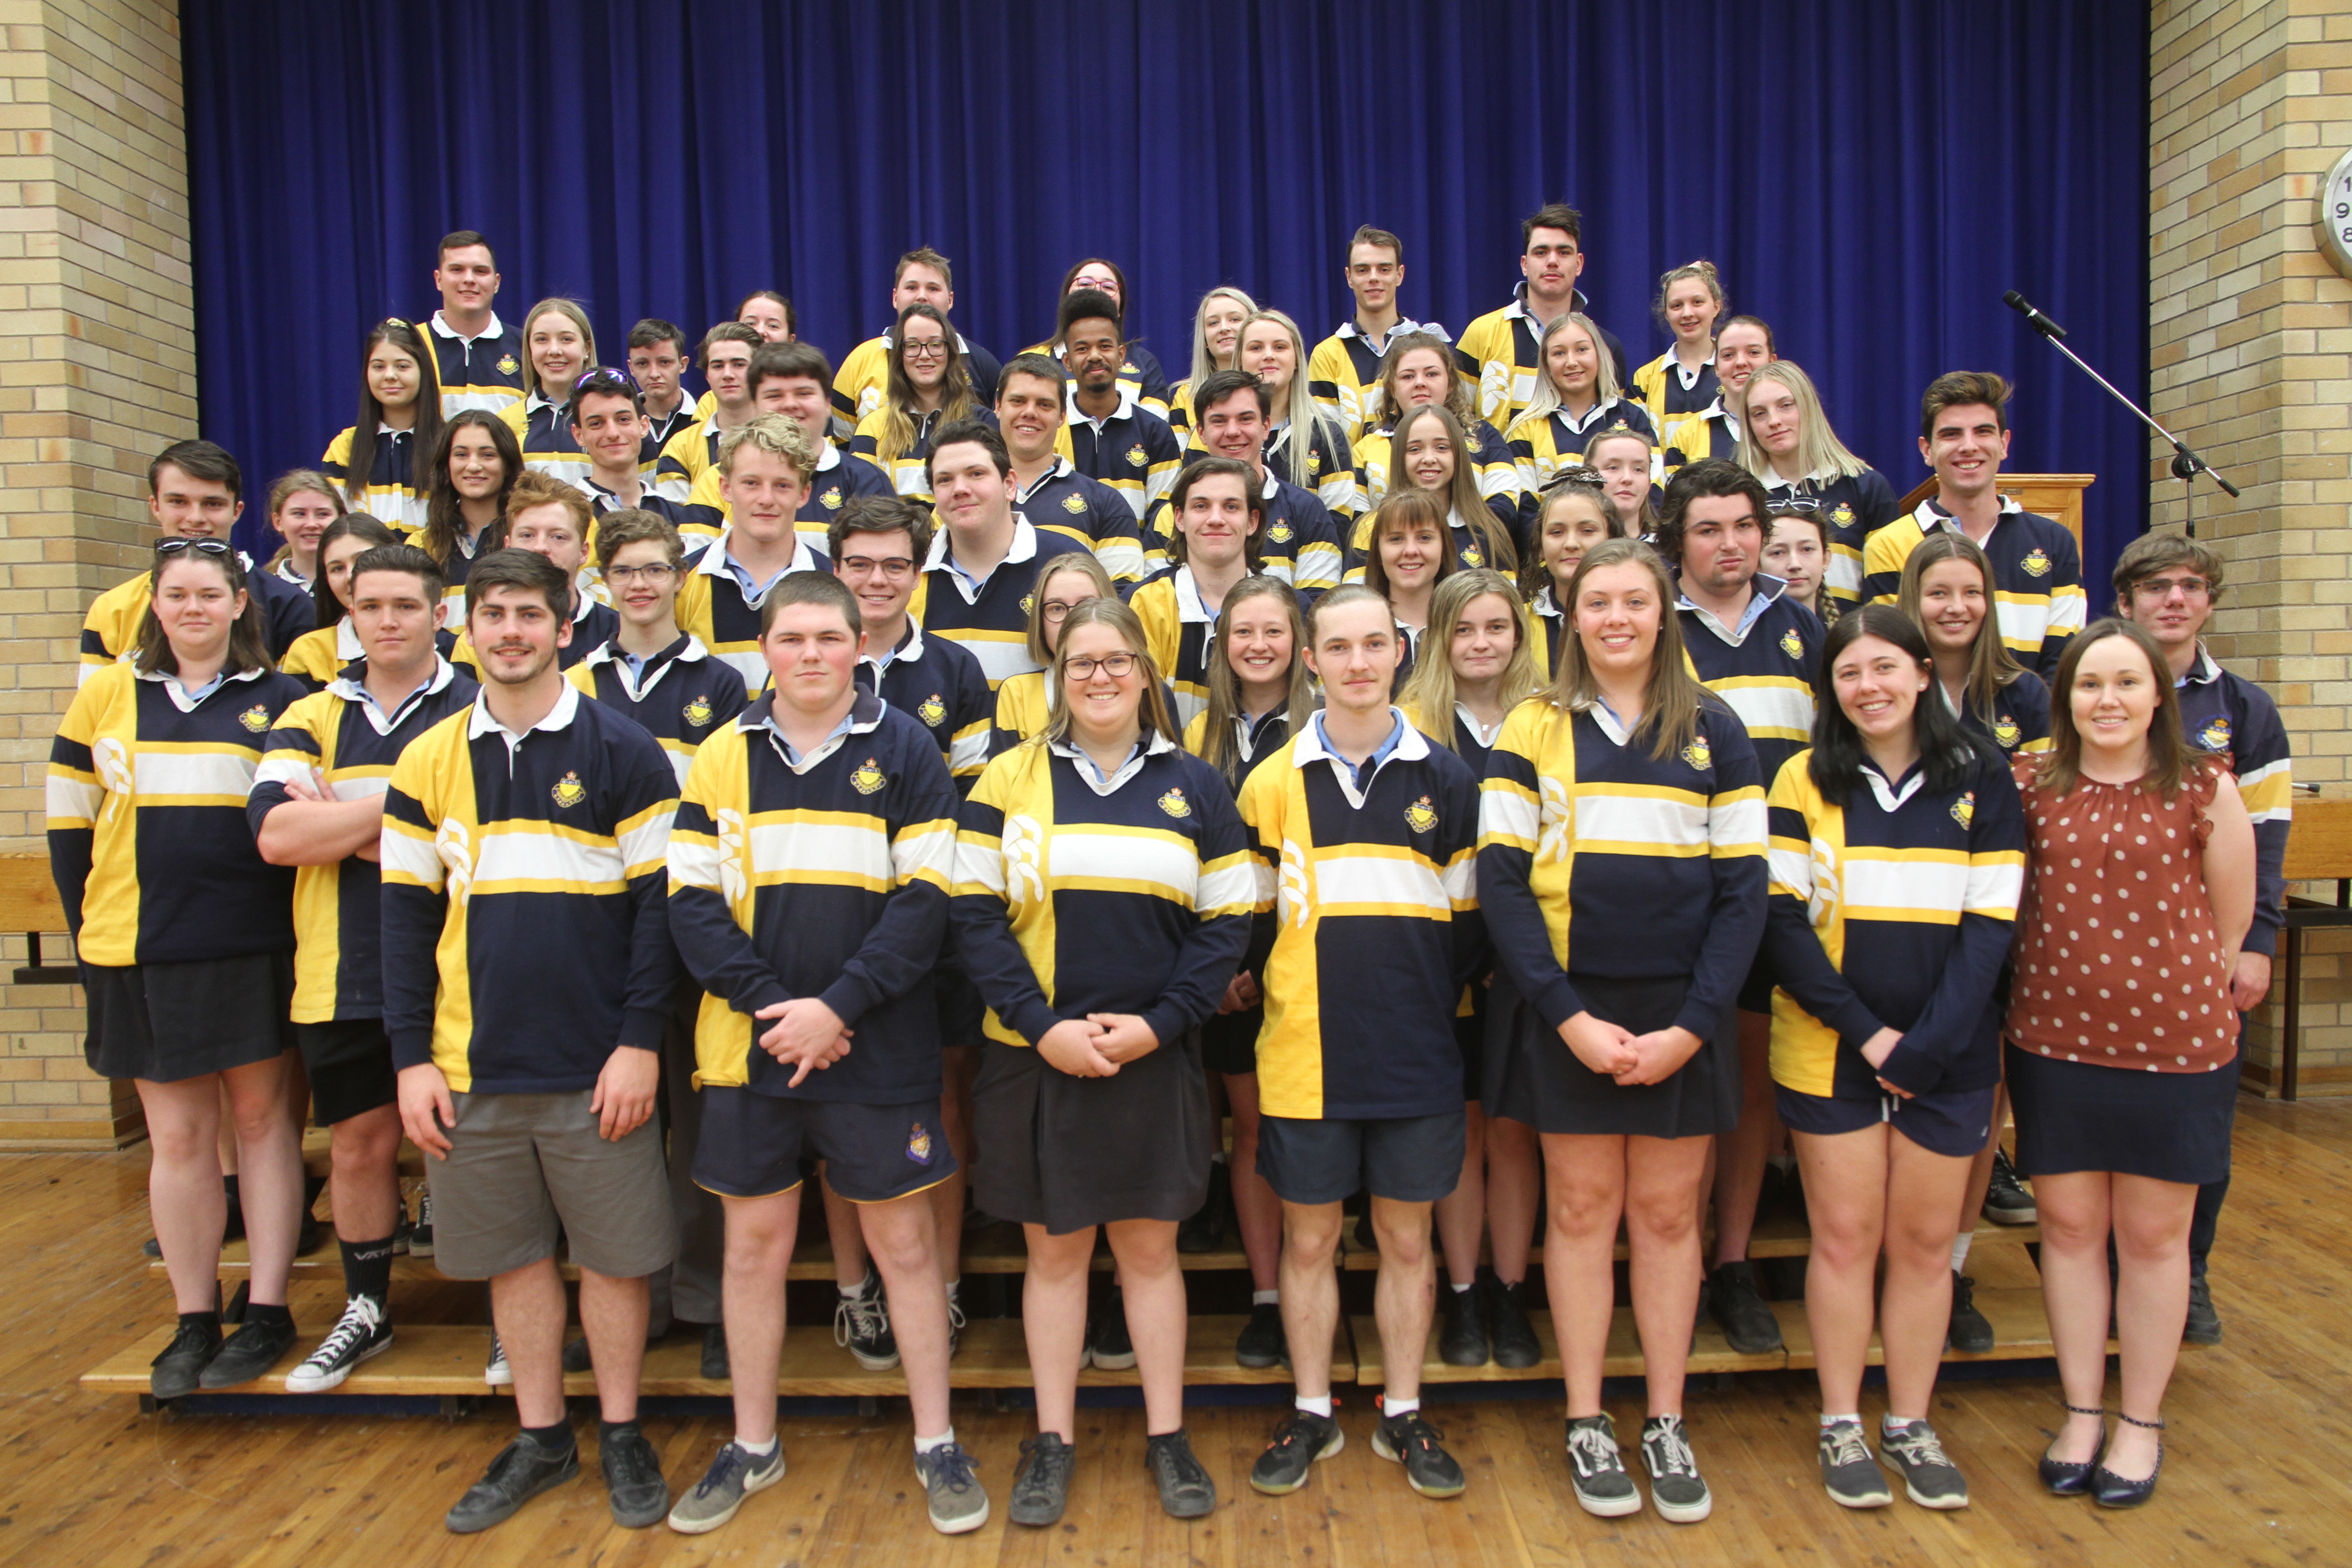 Final assembly for Narrabri High’s Year 12 class of 2019 – and now for the HSC